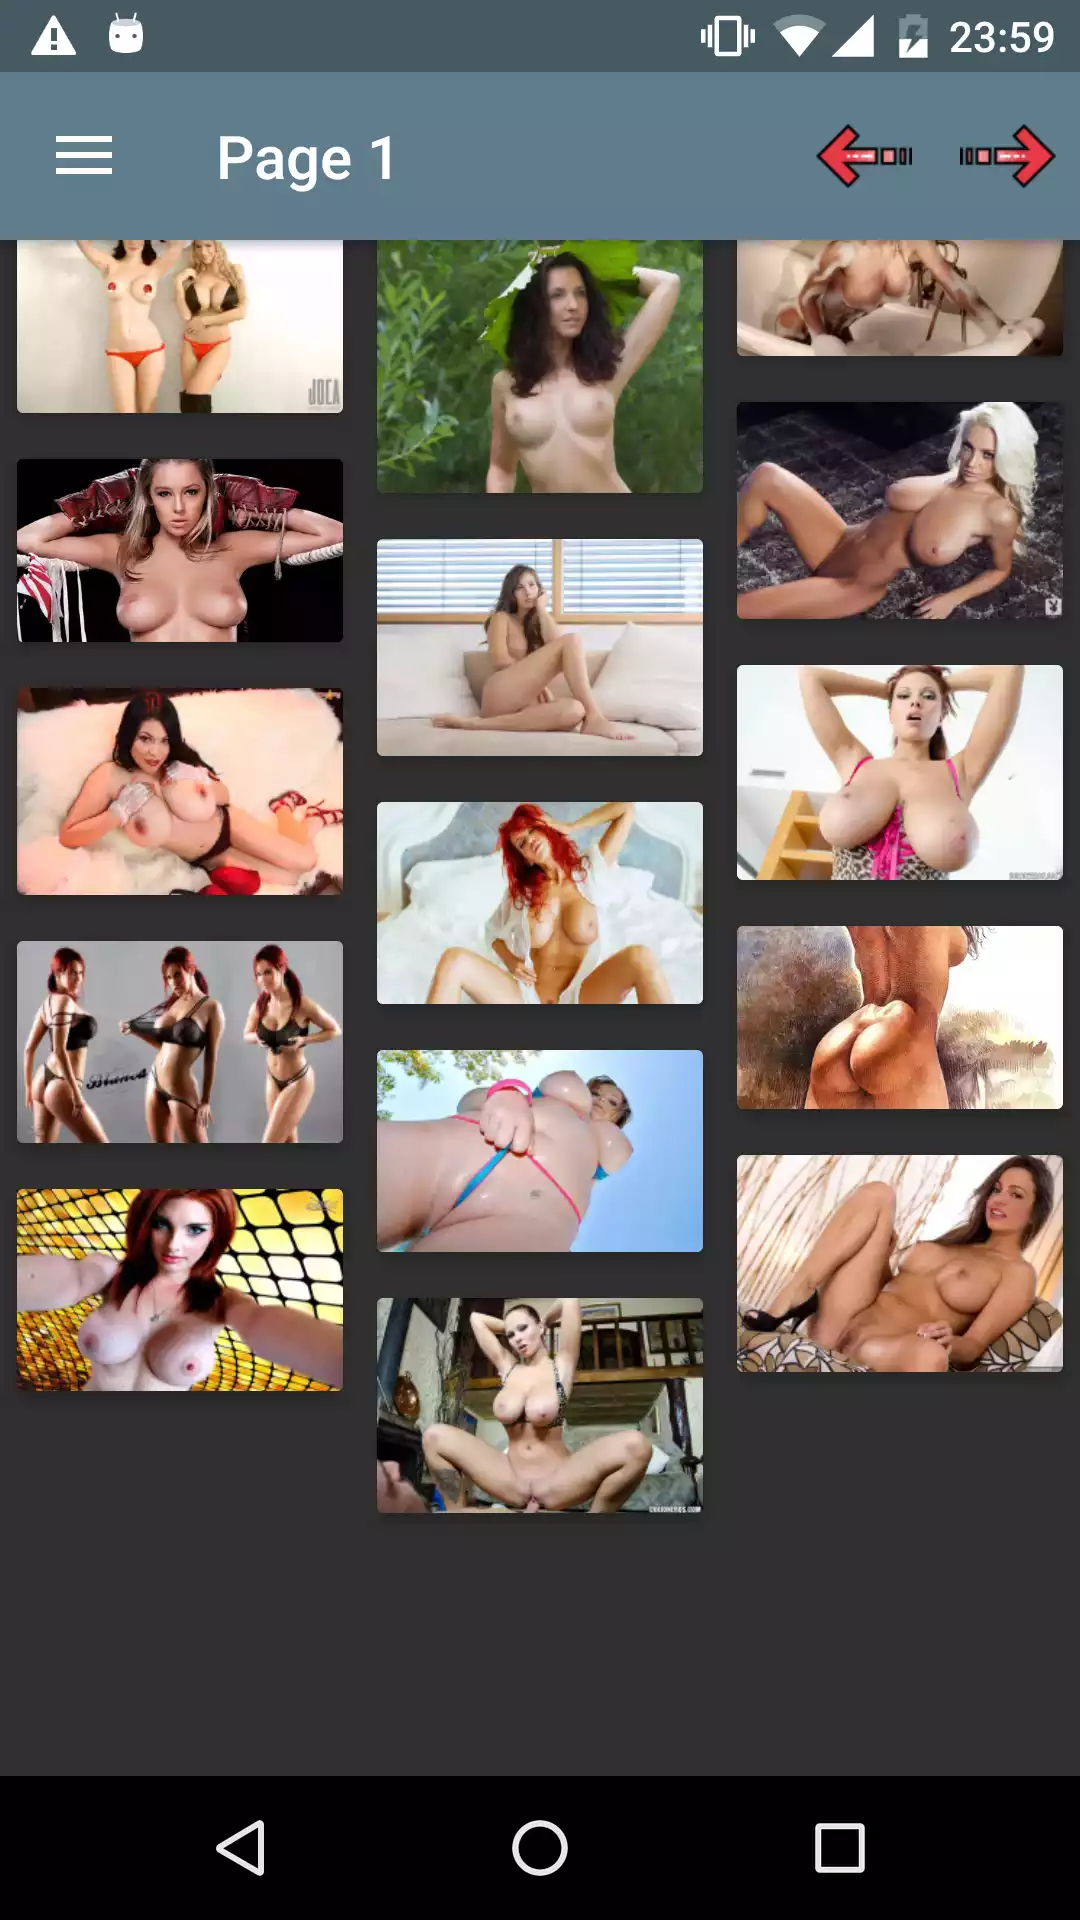 Big tits Walls apk,hot,ebony,photo,updates,erotic,android,cuckhold,finder,picture,nhentai,pornstar,pics,app,backgrounds,heantai,top,sexy,gallery,wallpapers,hentai,image,apps,wallpaper,hintai